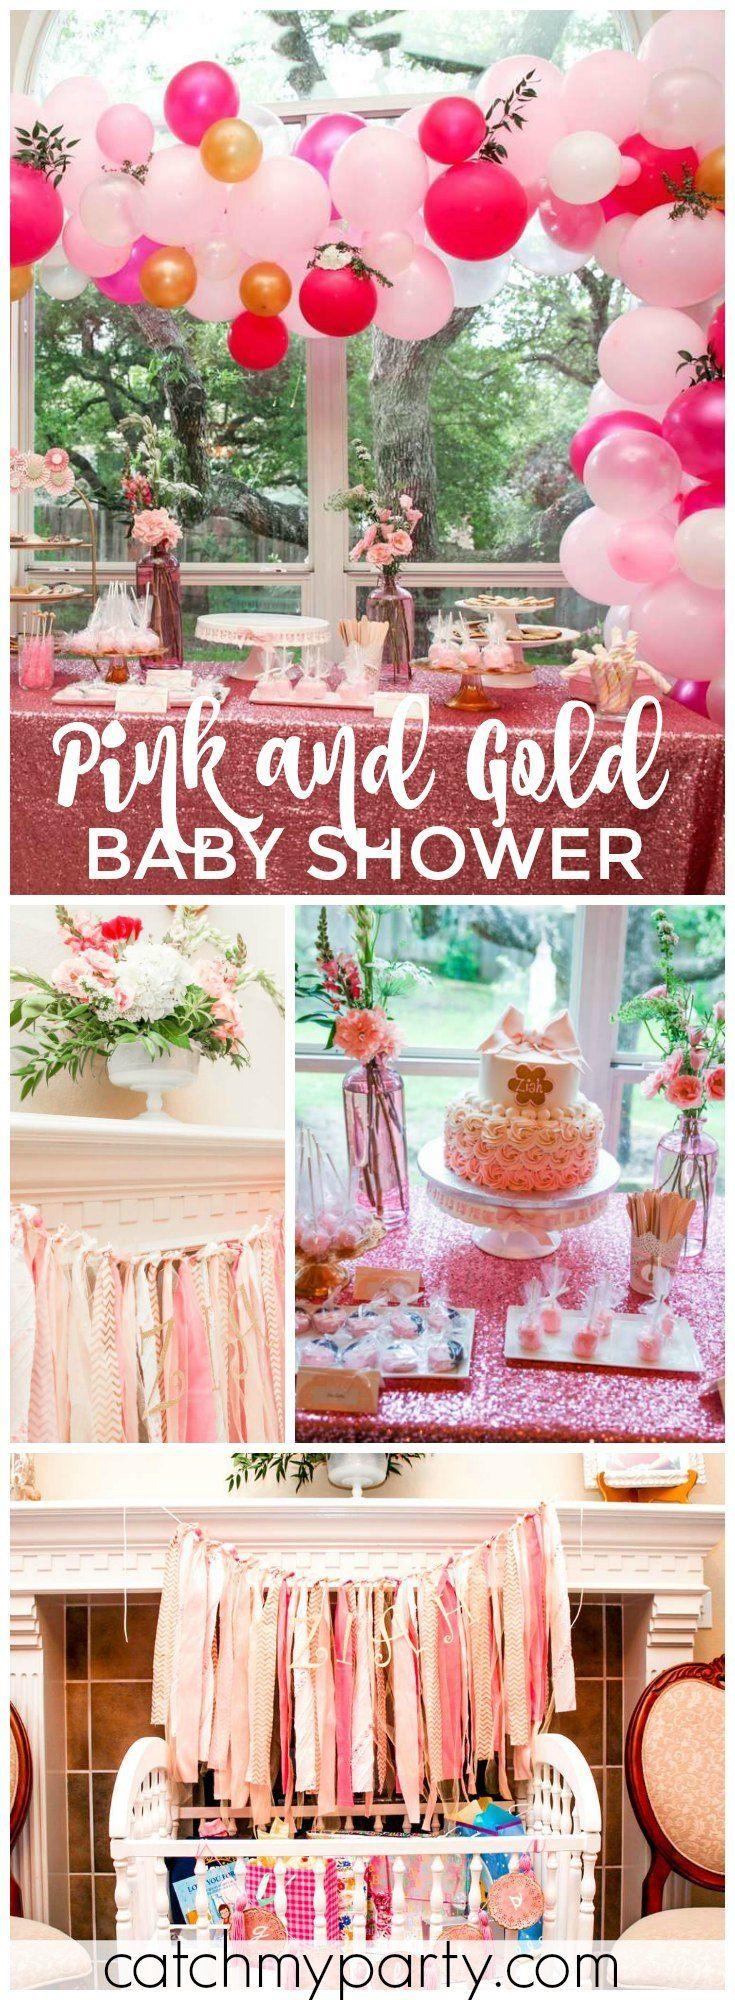 Wedding - Pink And Gold / Baby Shower "Pink And Gold"